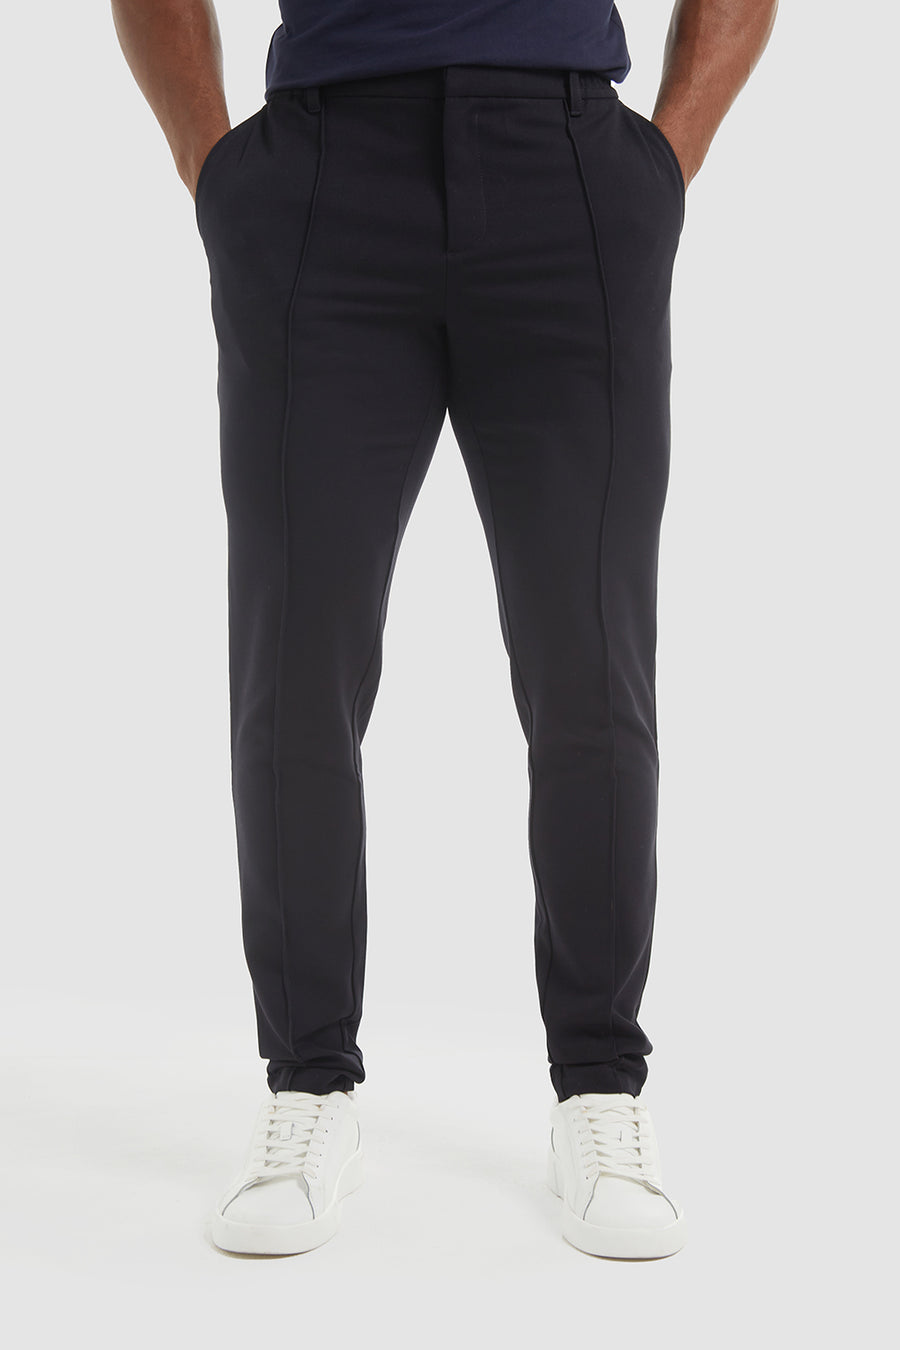 Stitched Crease Trousers in Navy - TAILORED ATHLETE - USA